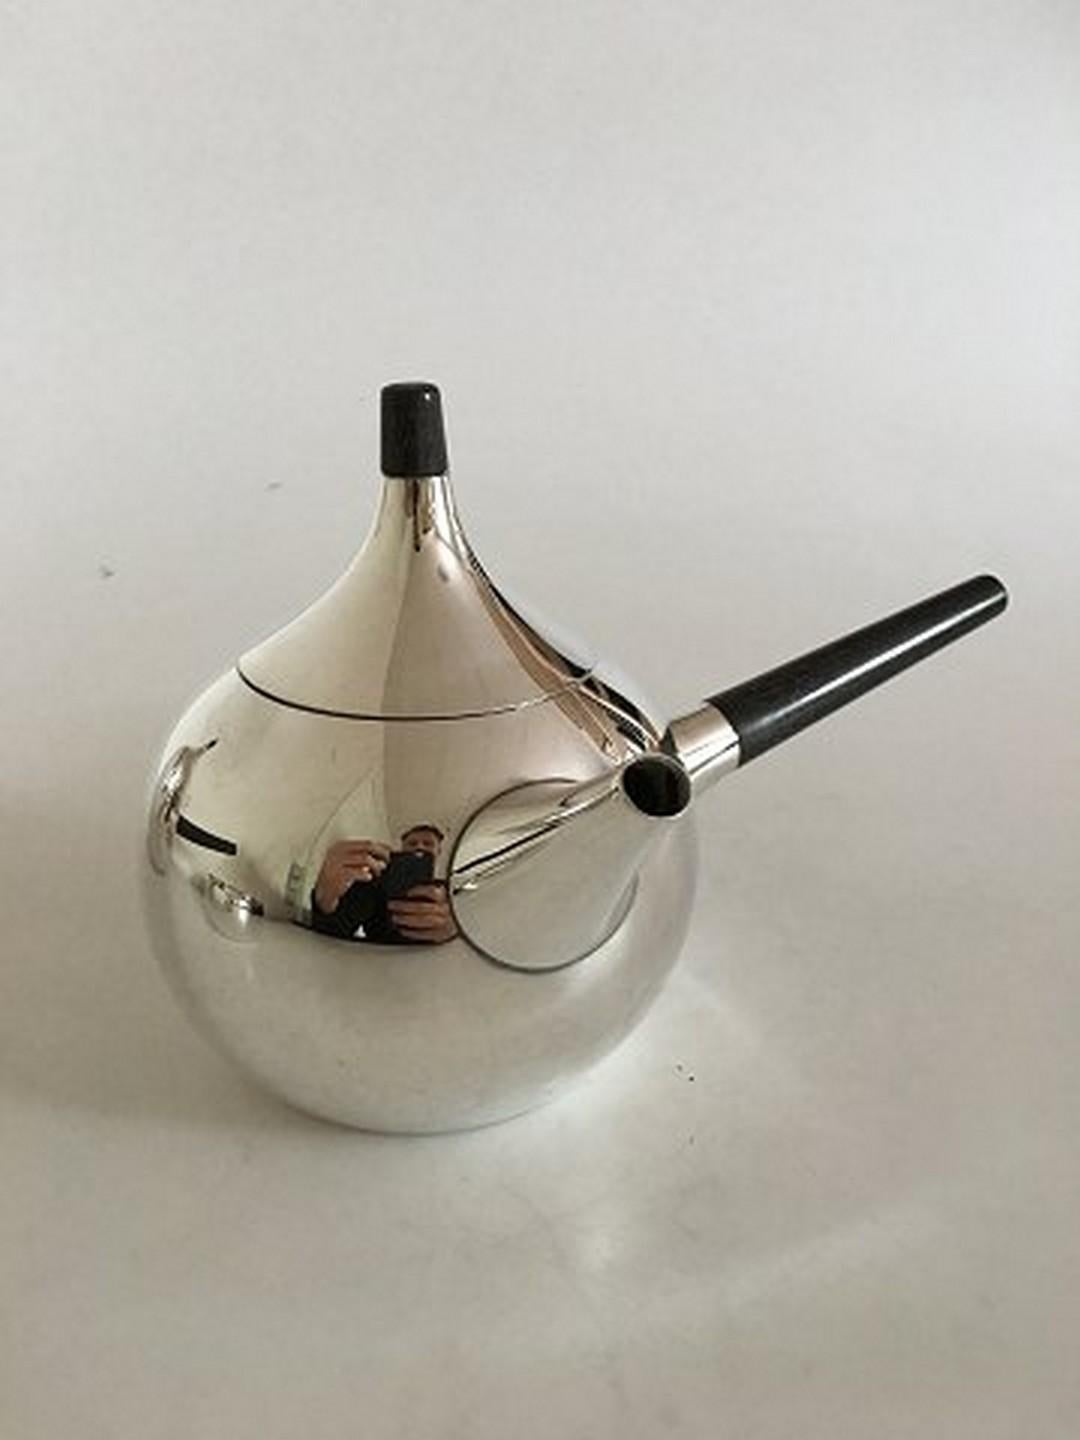 Georg Jensen sterling silver Henning Koppel coffee and teapot no. 1091. Both pots are with wooden handle and top. Coffee pot measures 11 cm H / 4 21/64